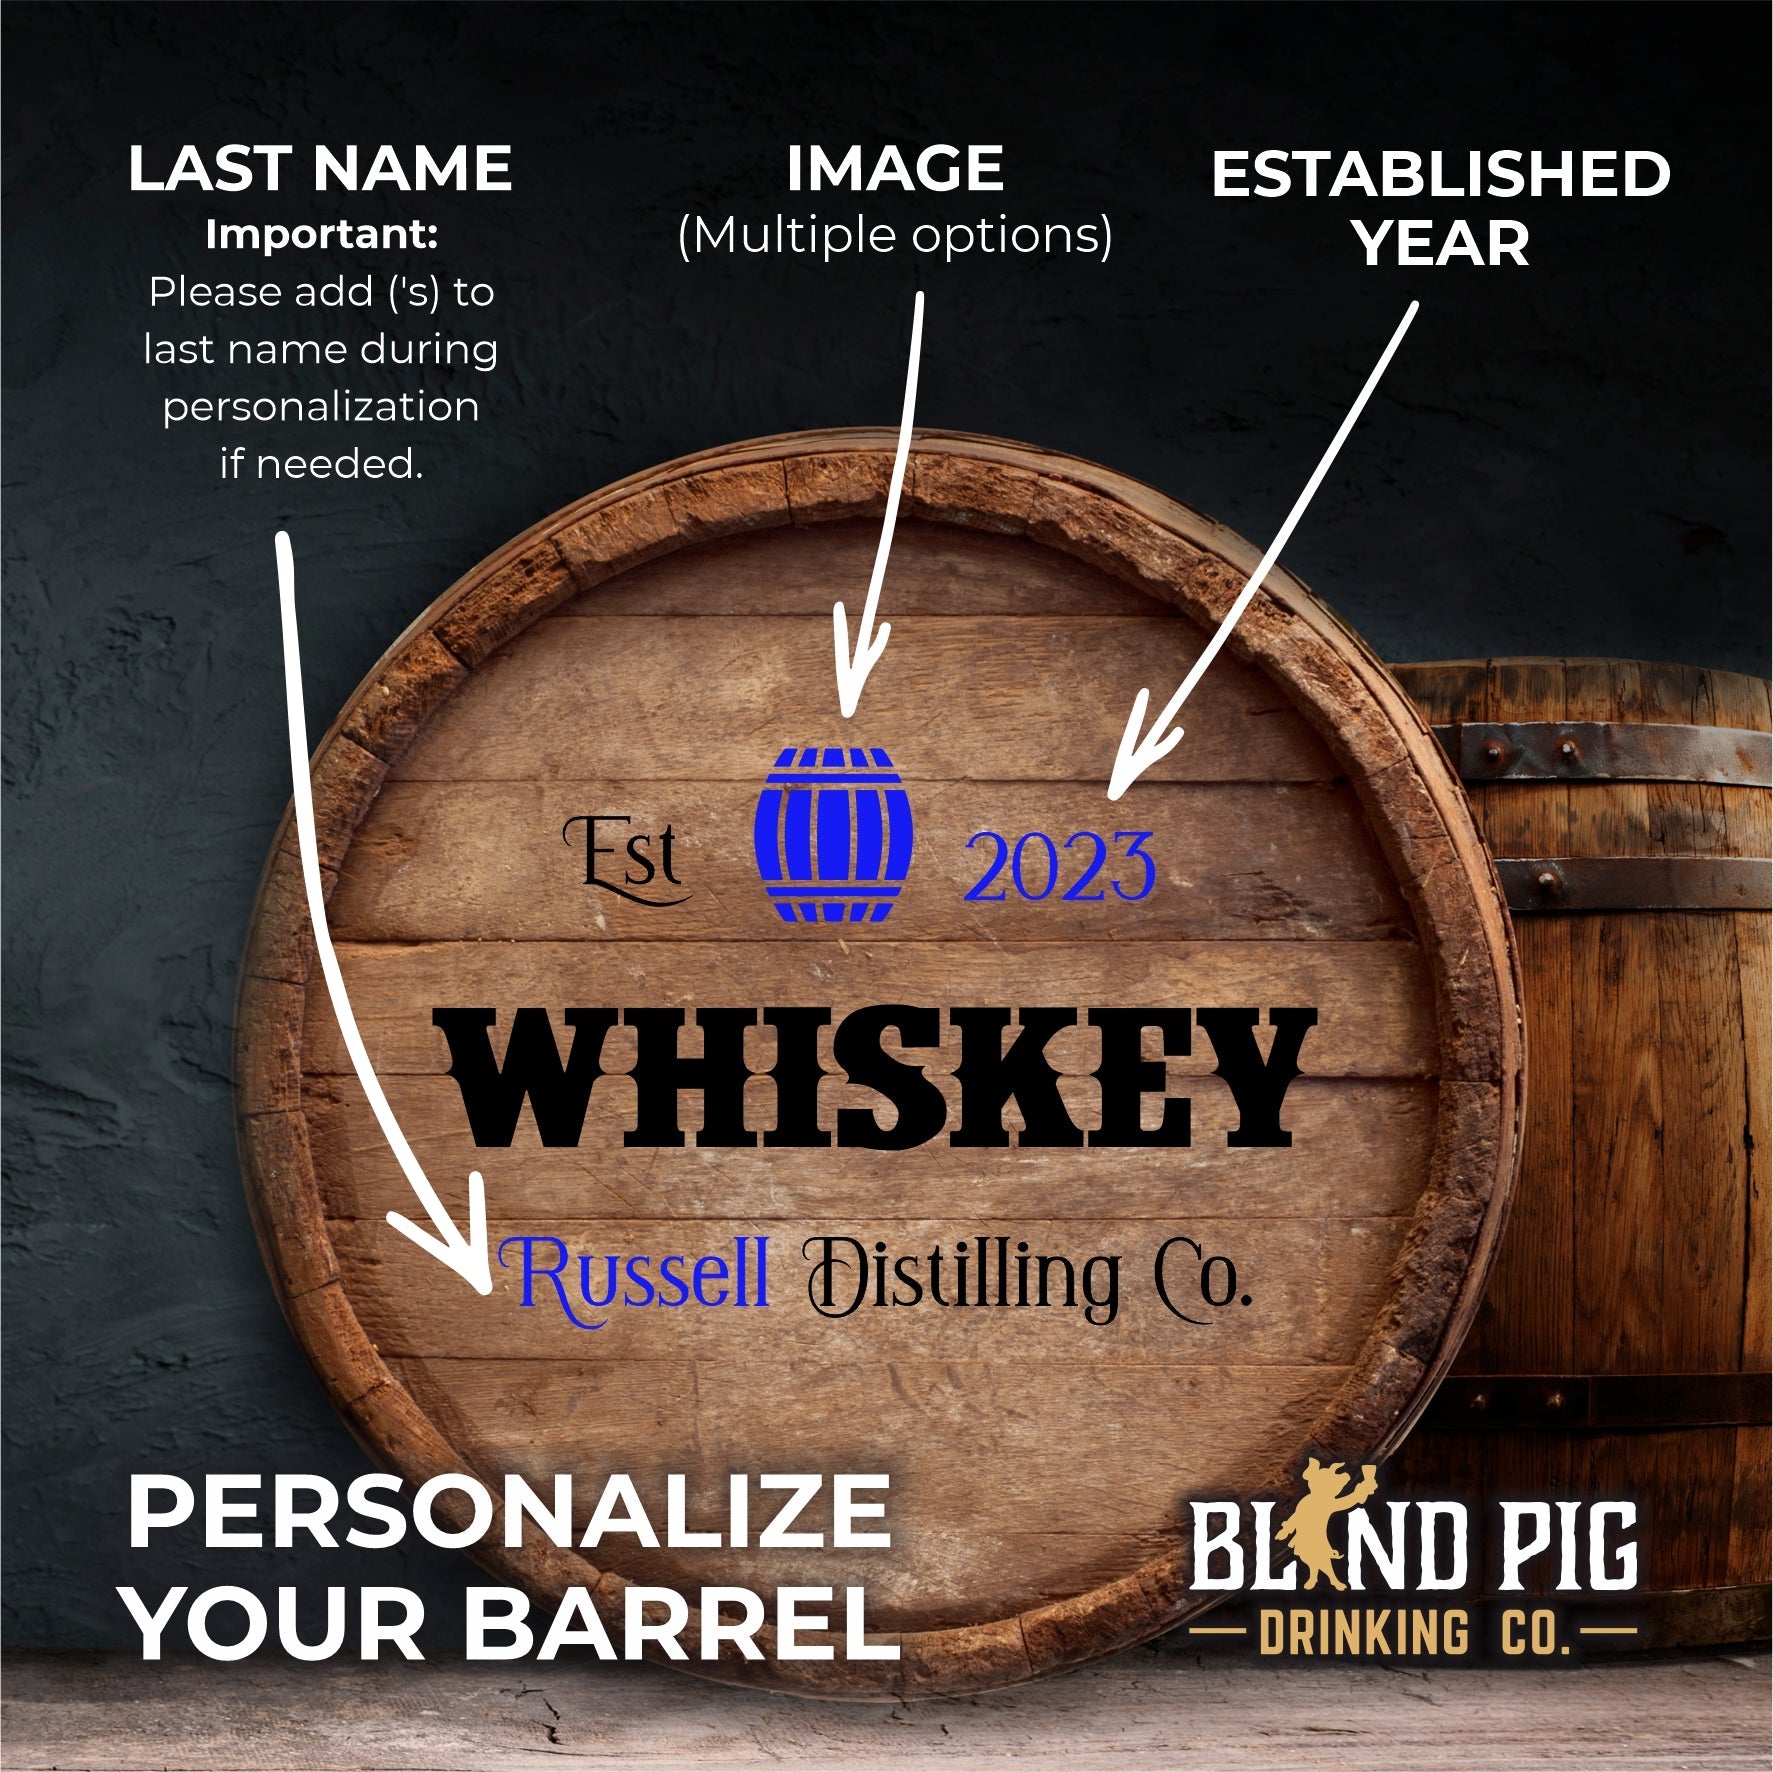 Personalized Small Oak Whiskey Barrel for Aging Cocktails - Blind Pig Drinking Co.